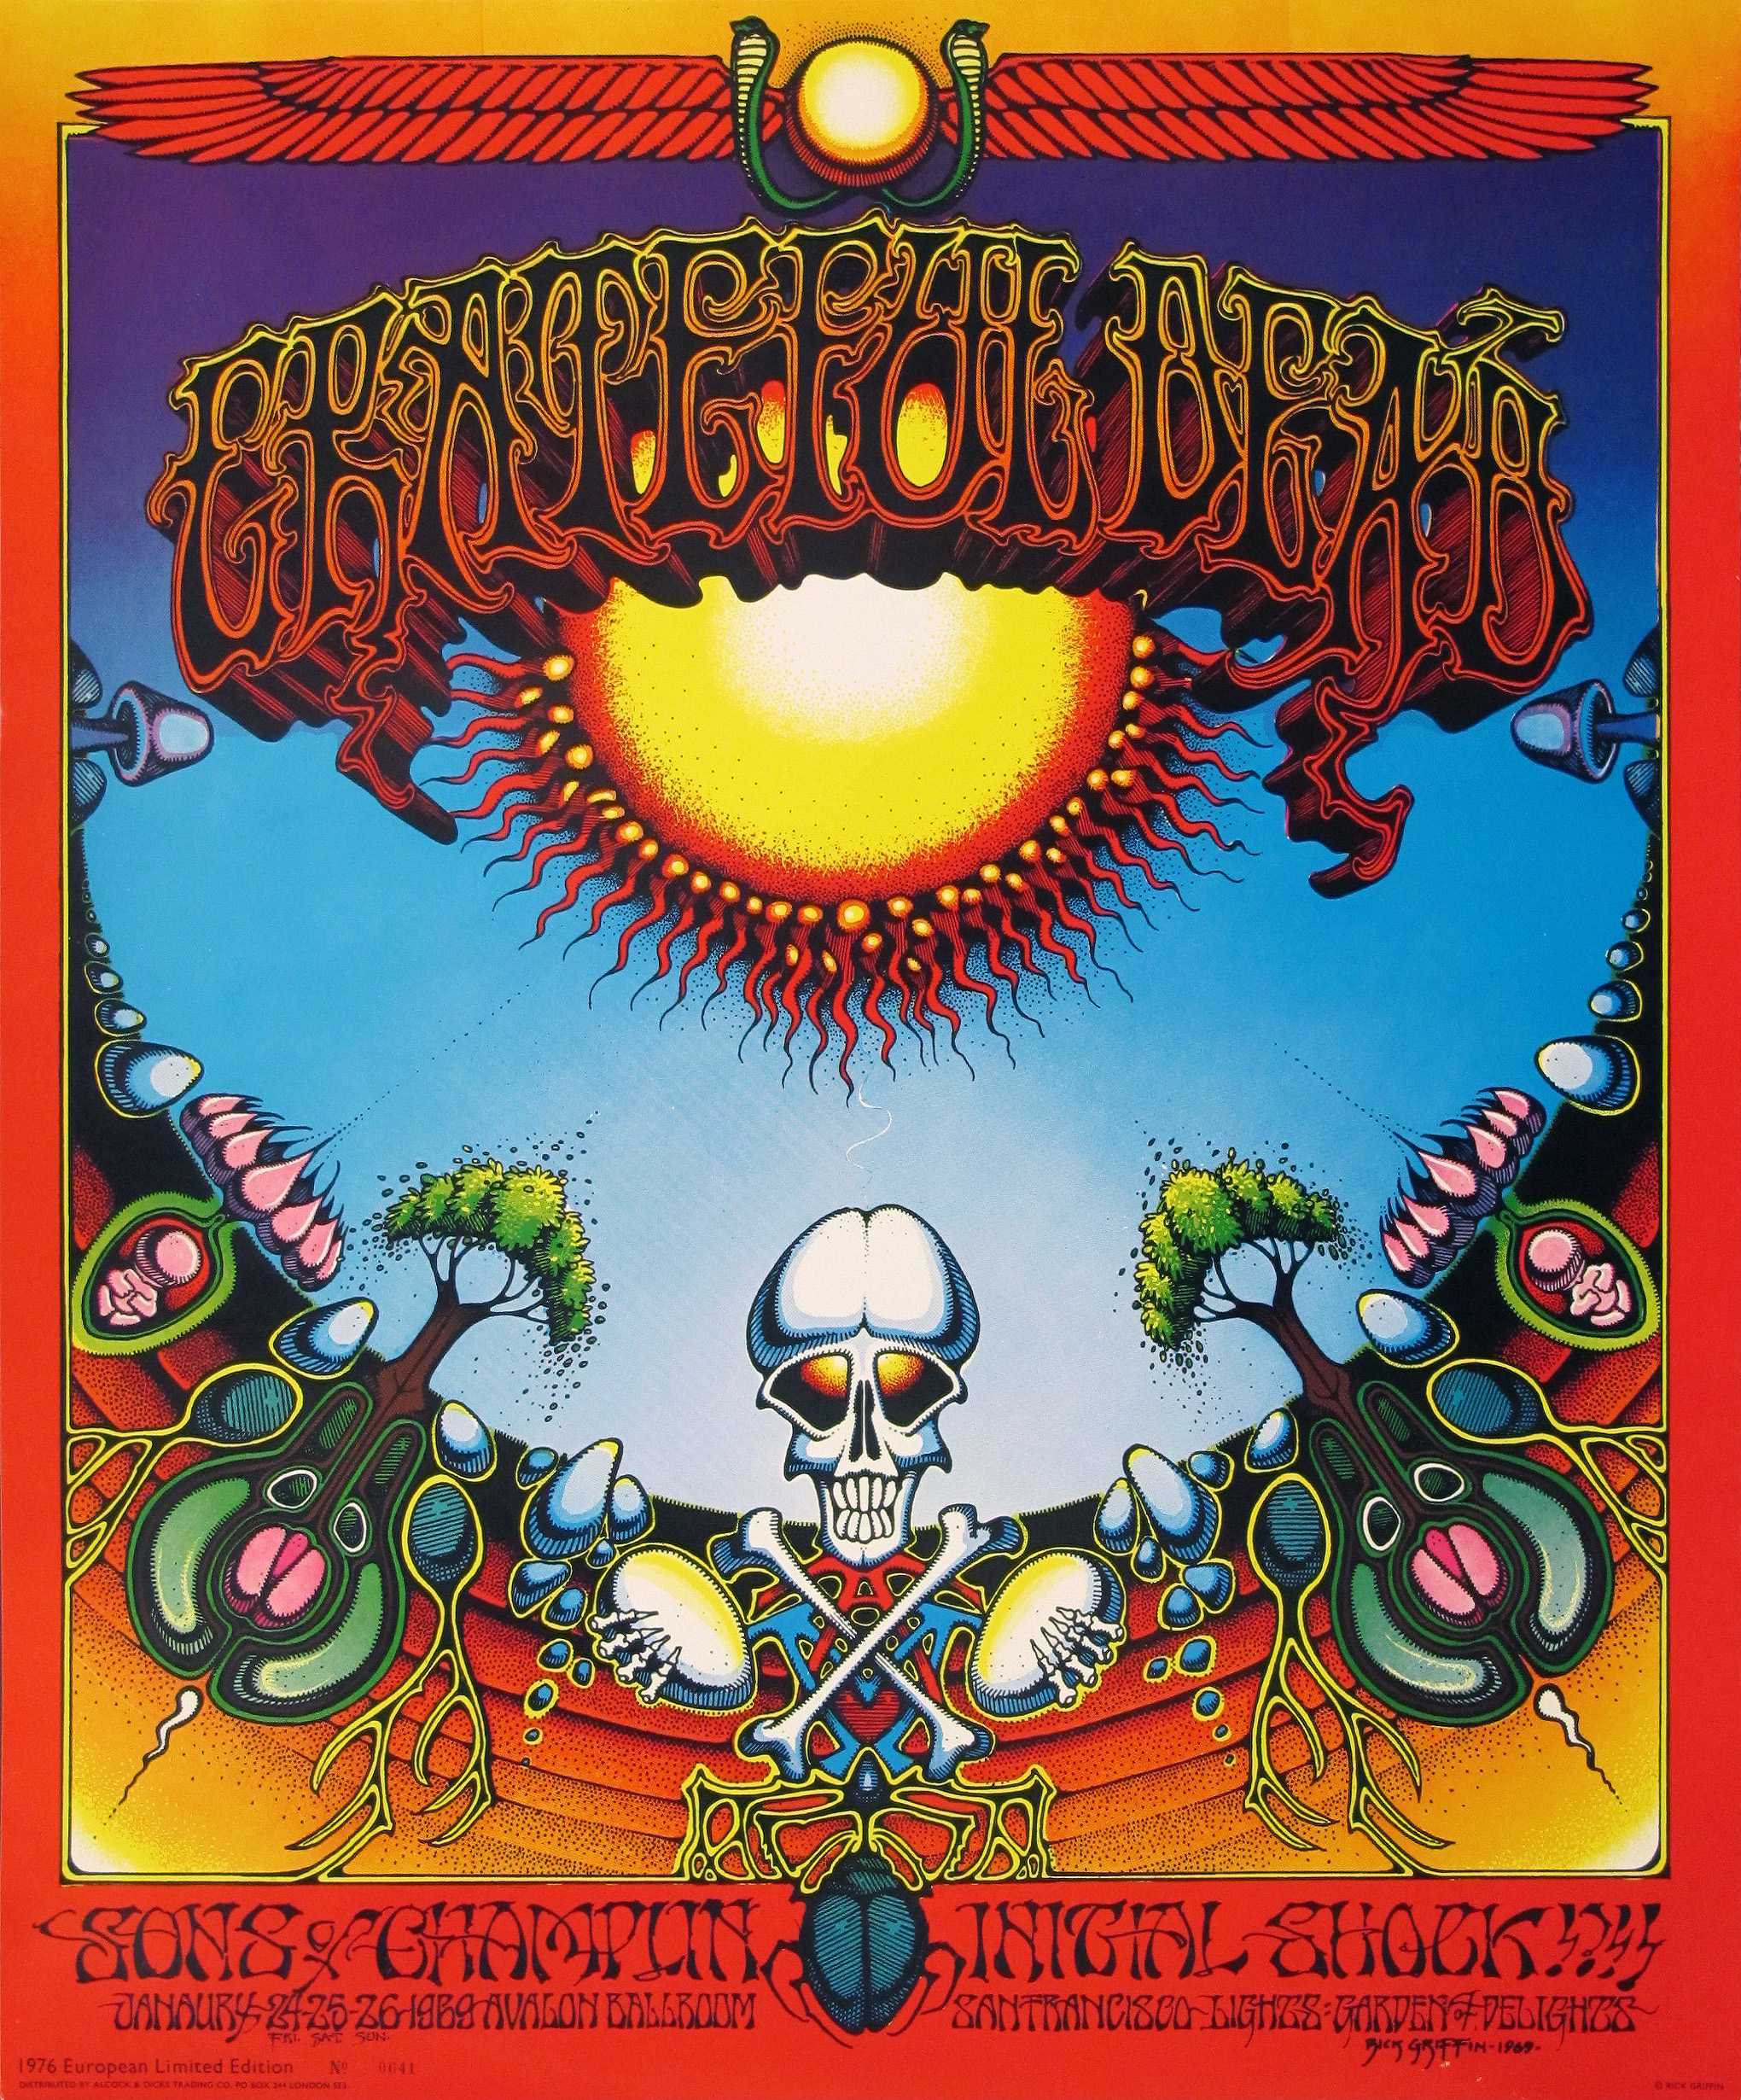 Aoxoamoxoa Grateful Dead And Sons Of Champlin